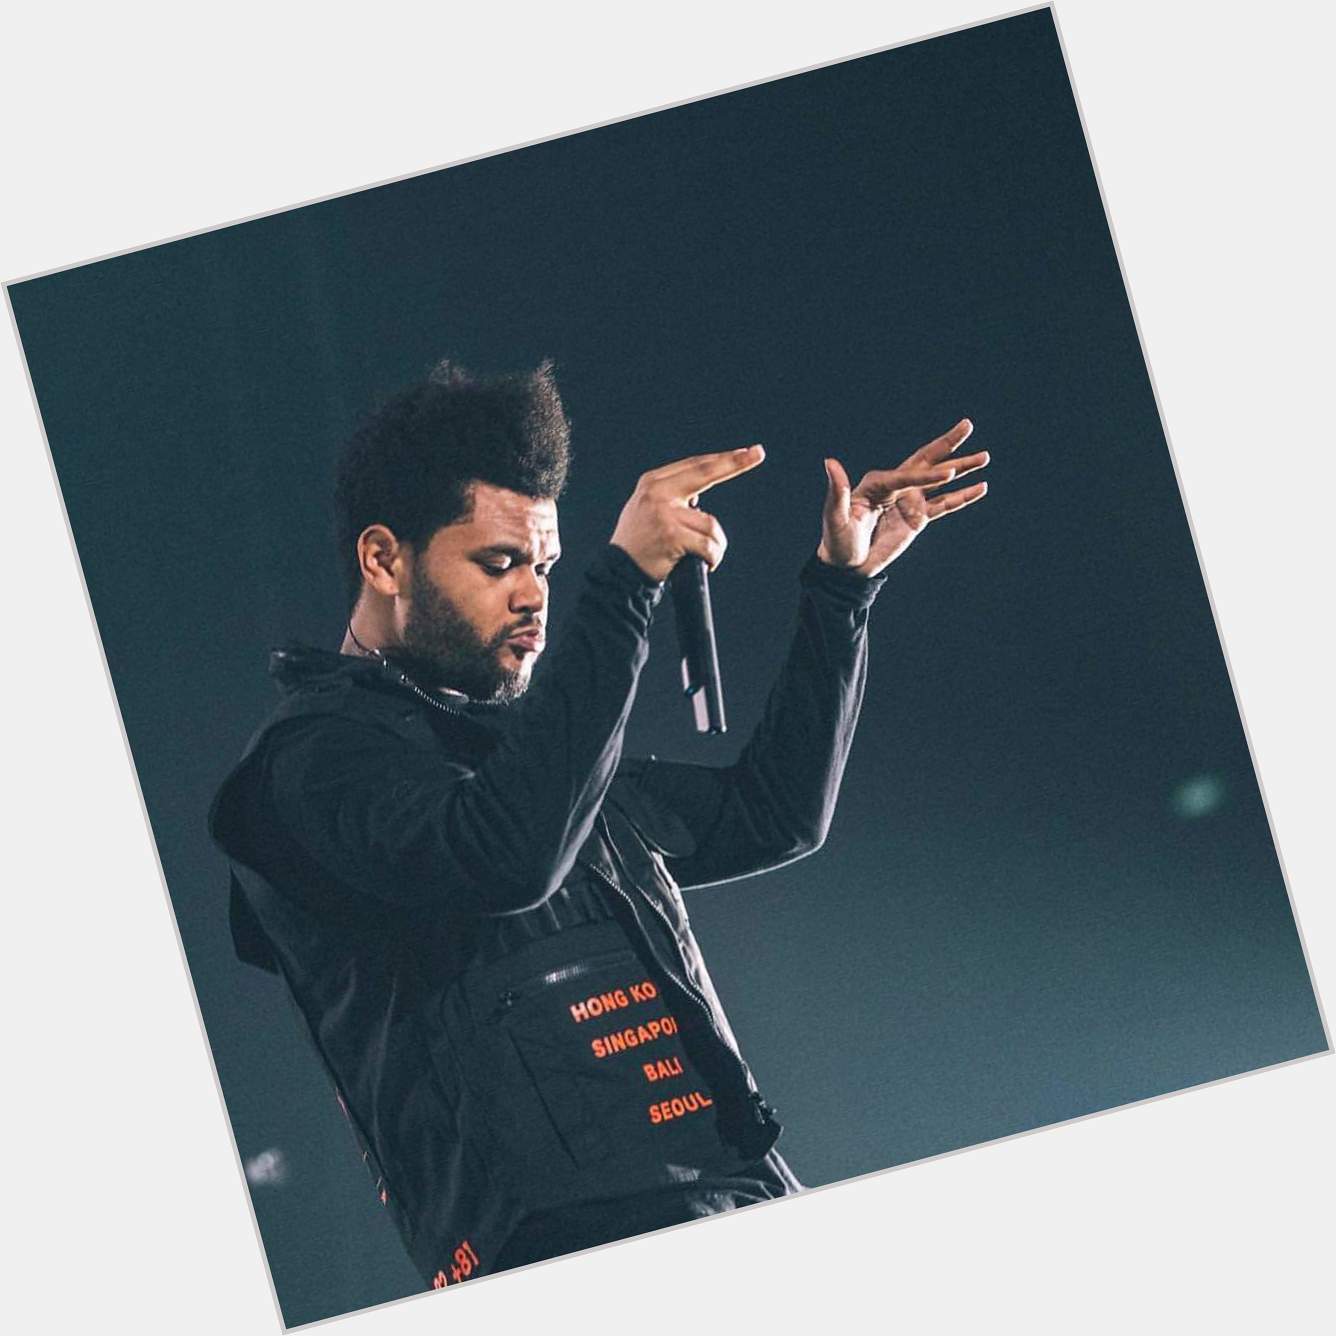 Happy 30th birthday to the best singer ever,
THE WEEKND.
just enjoy his music.
XOTWOD 